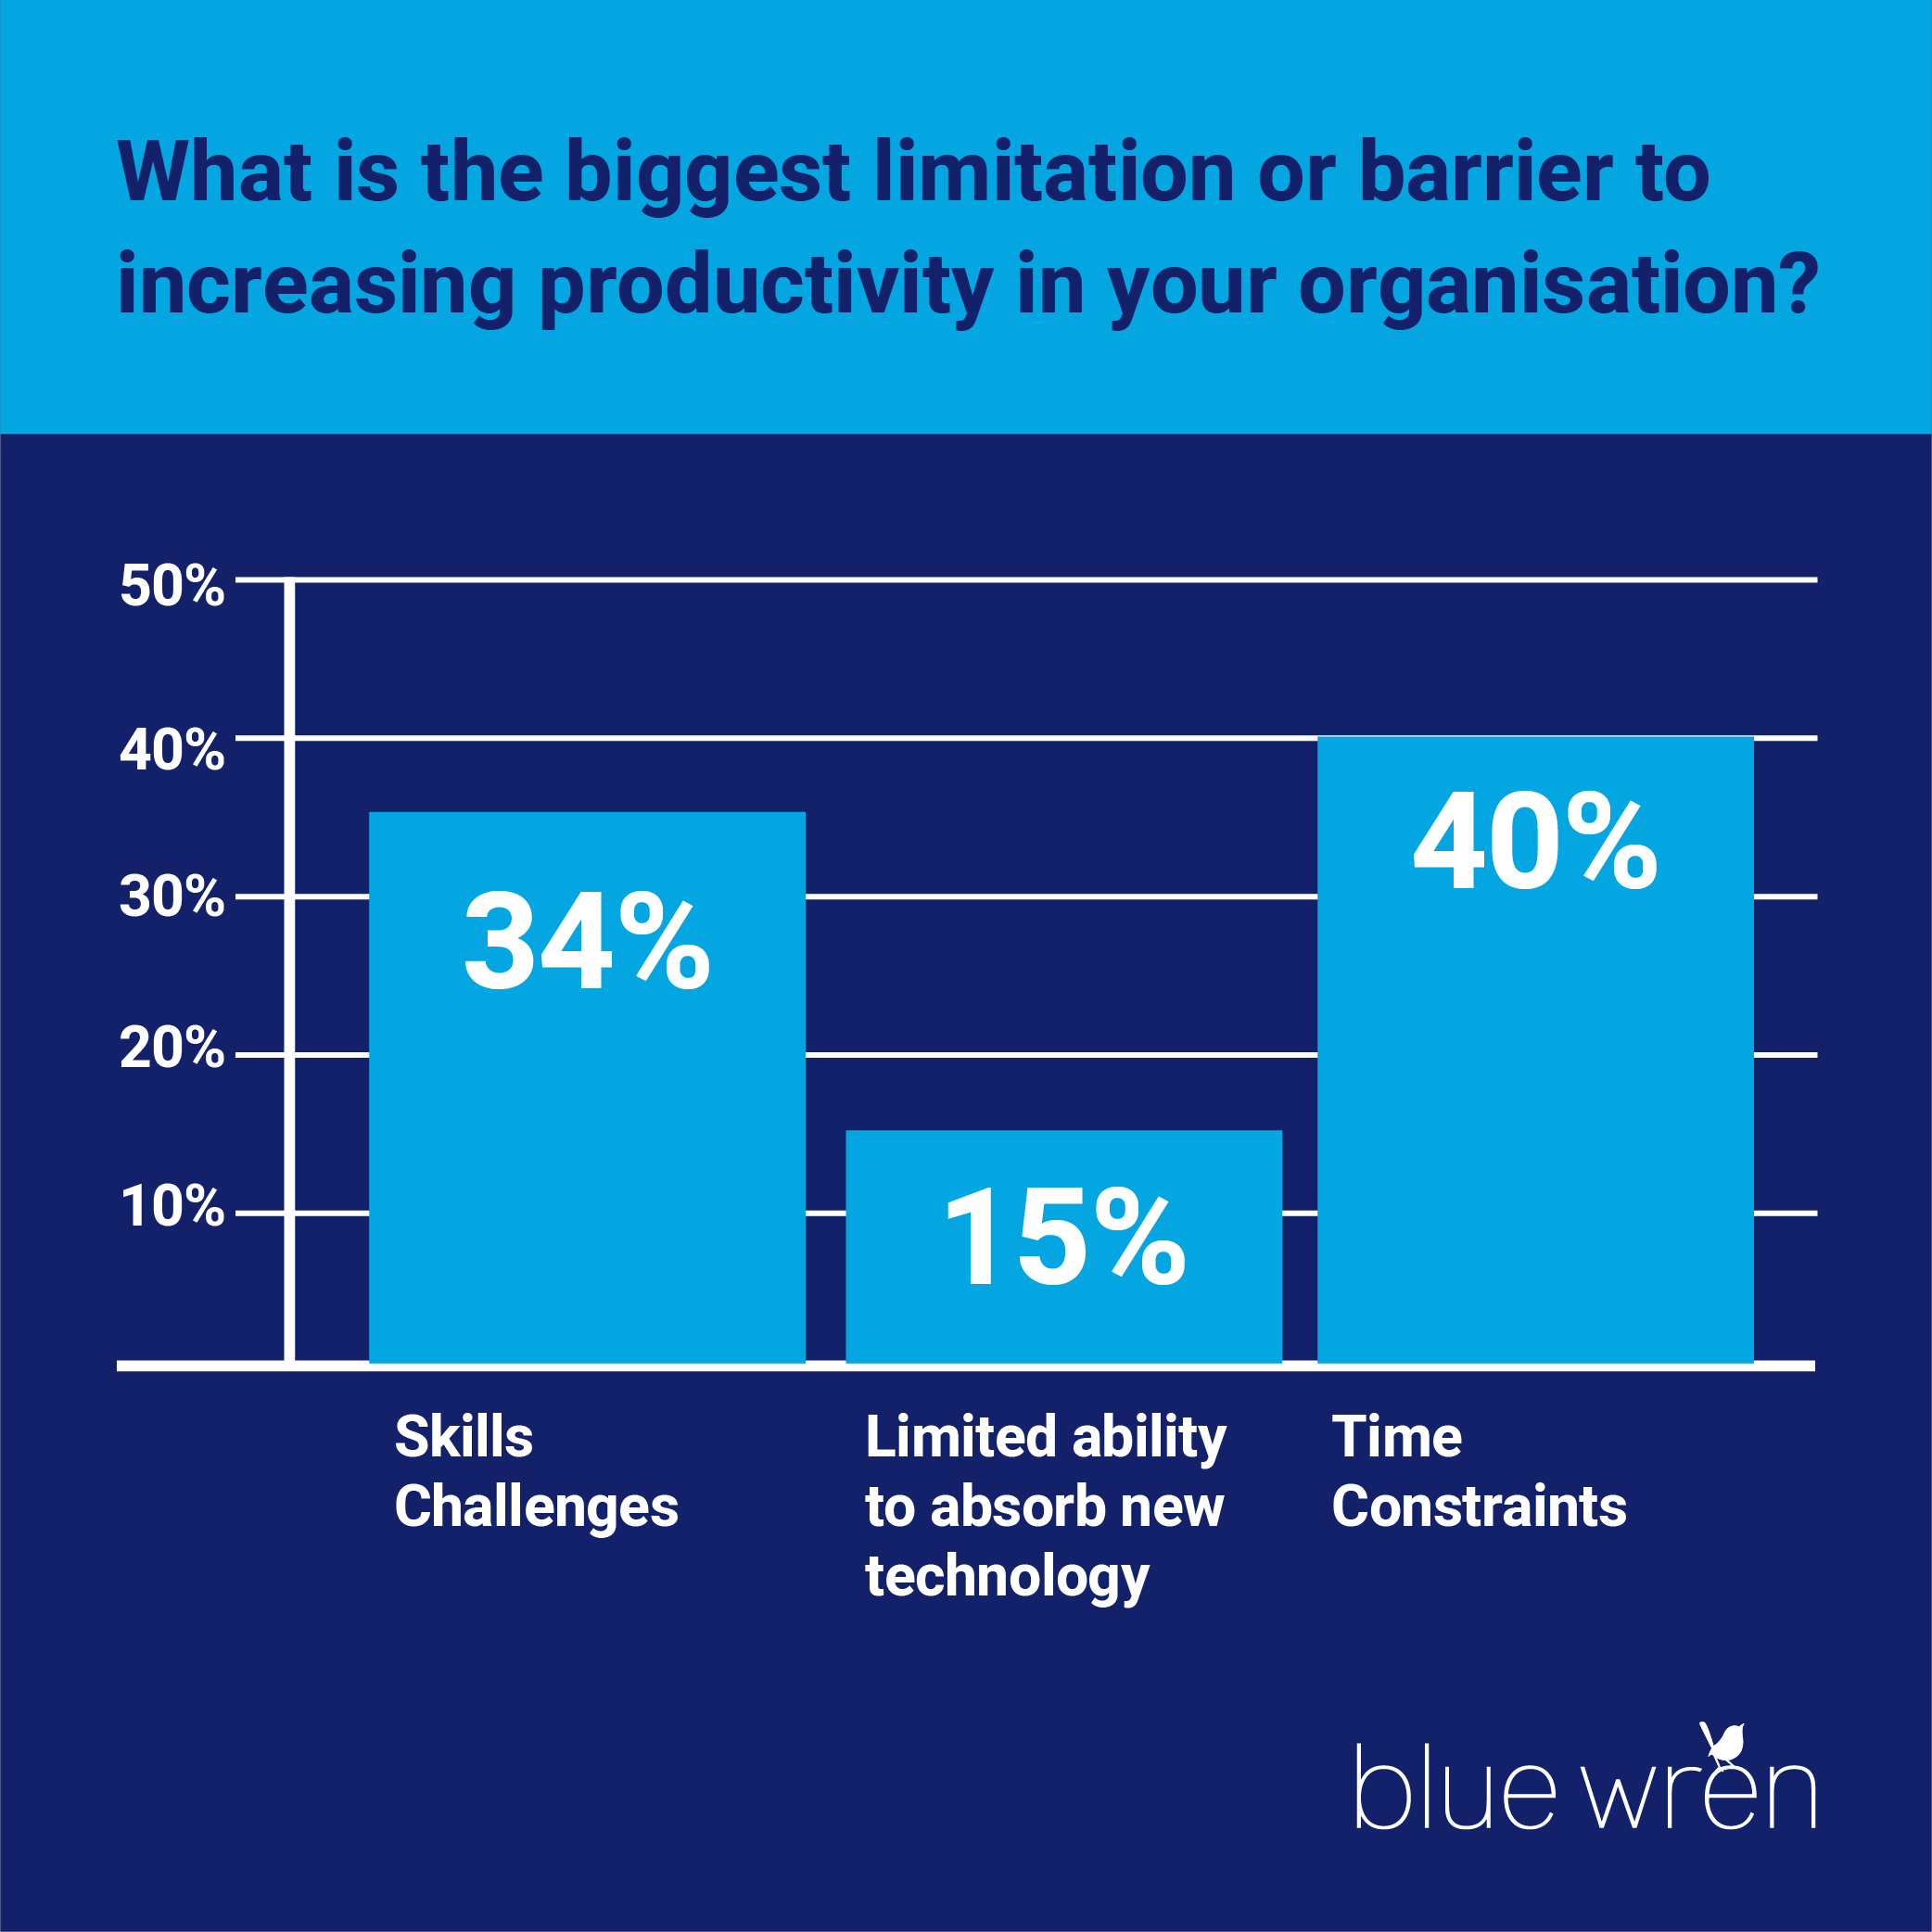 The biggest limitation to increasing productivity